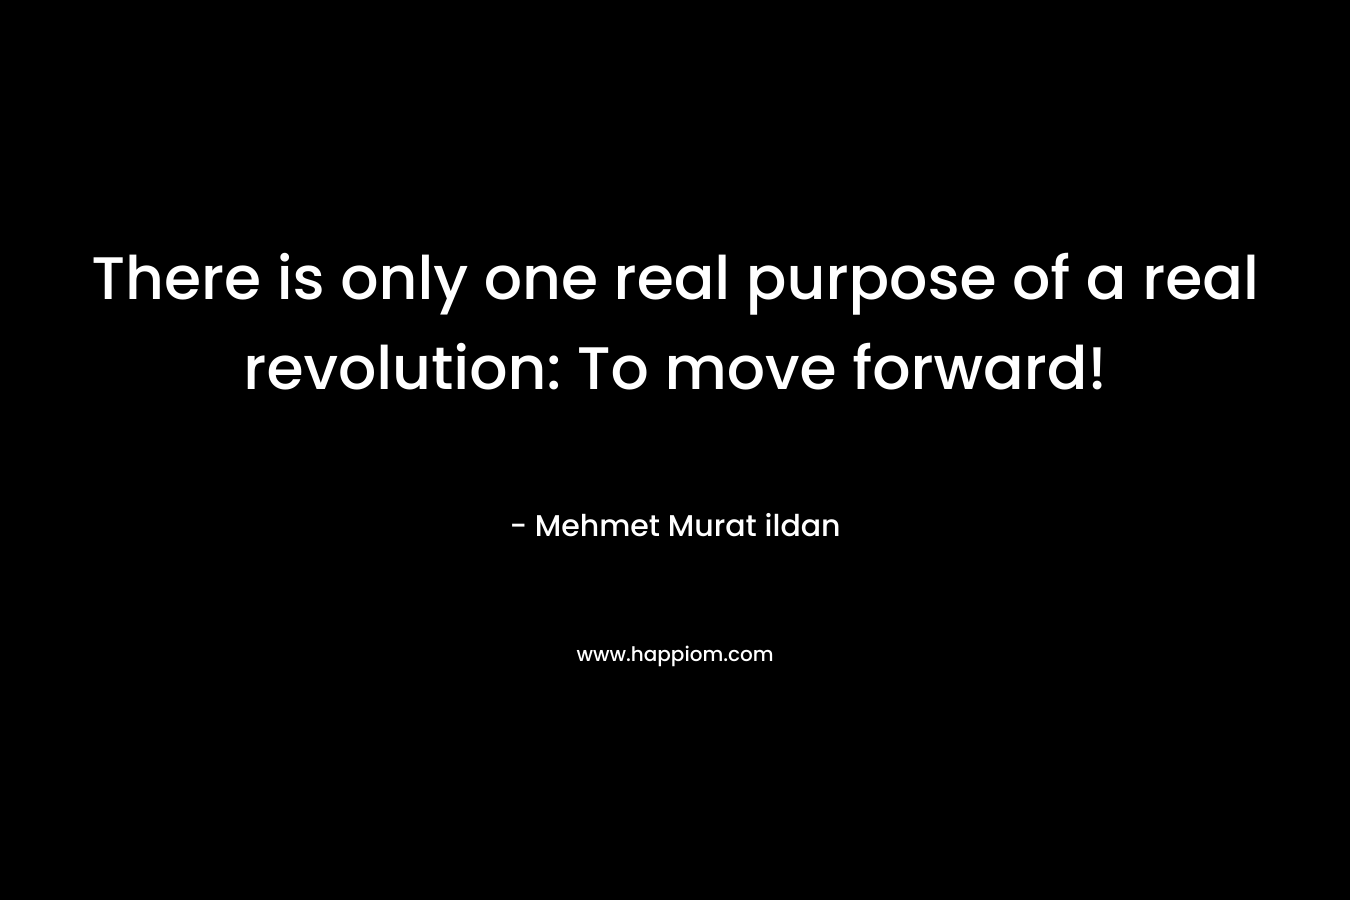 There is only one real purpose of a real revolution: To move forward!